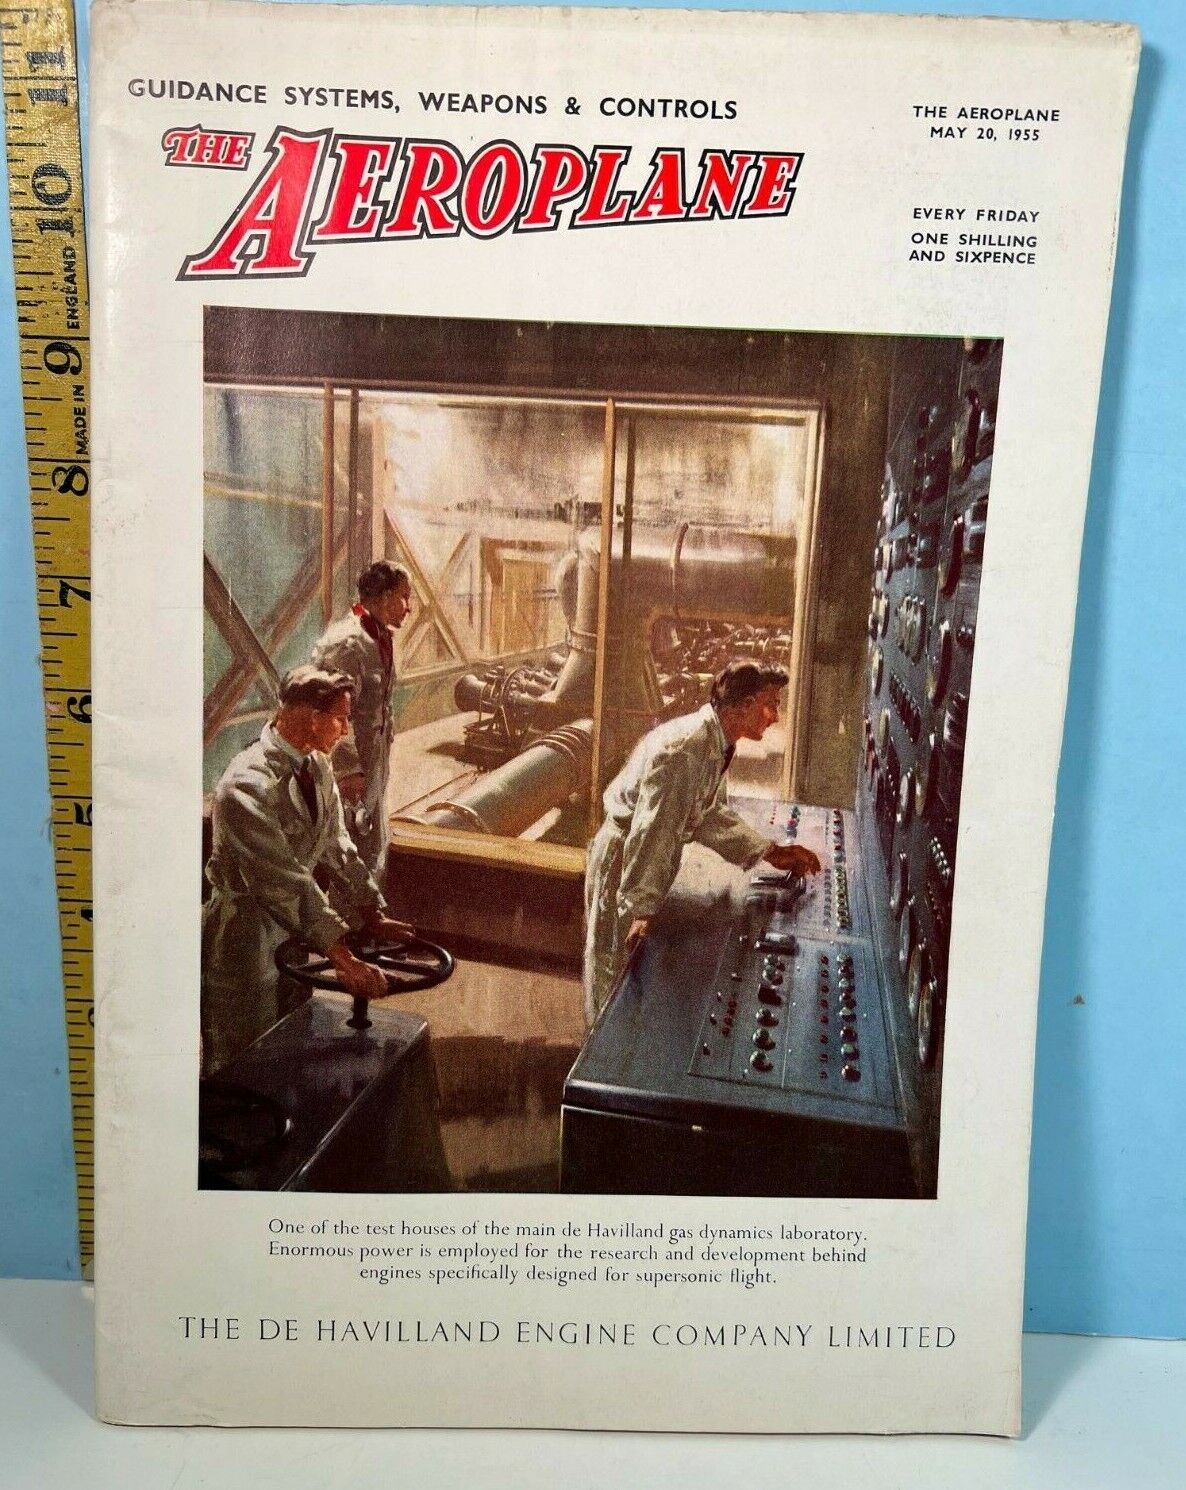 1955 The Aeroplane: Guidance Systems, Weapons & Controls UK Magazine 